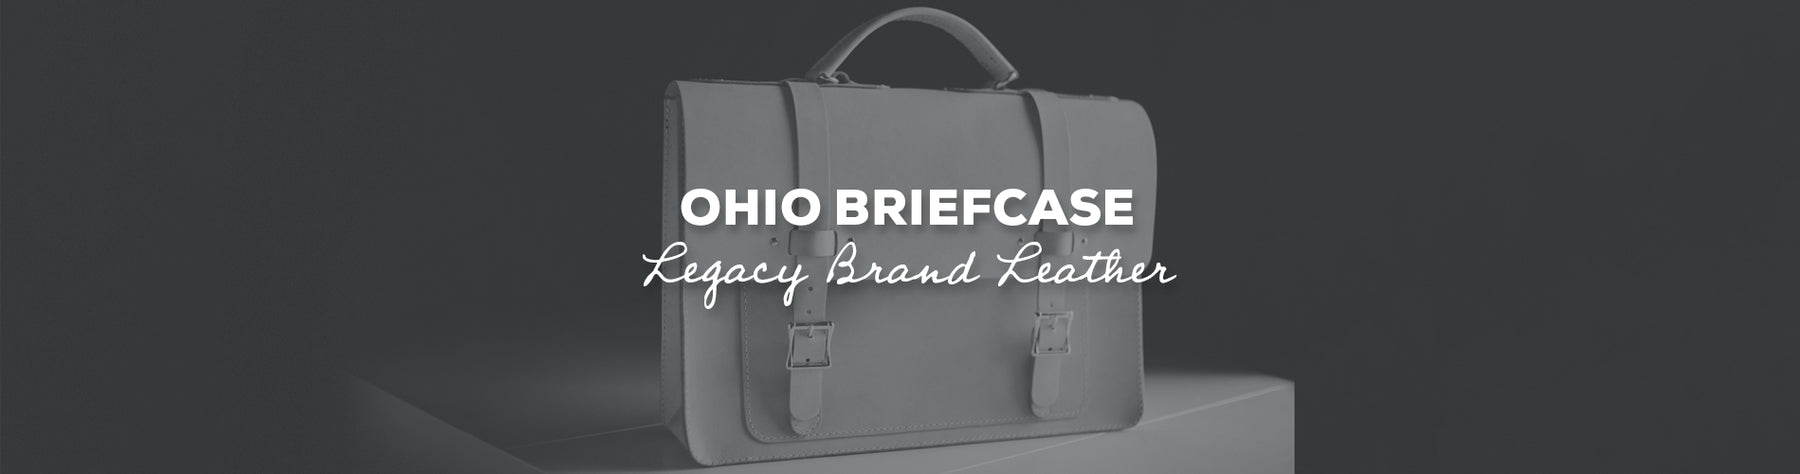 Gift Idea: Ohio Briefcase Kit with Legacy Brand Leather